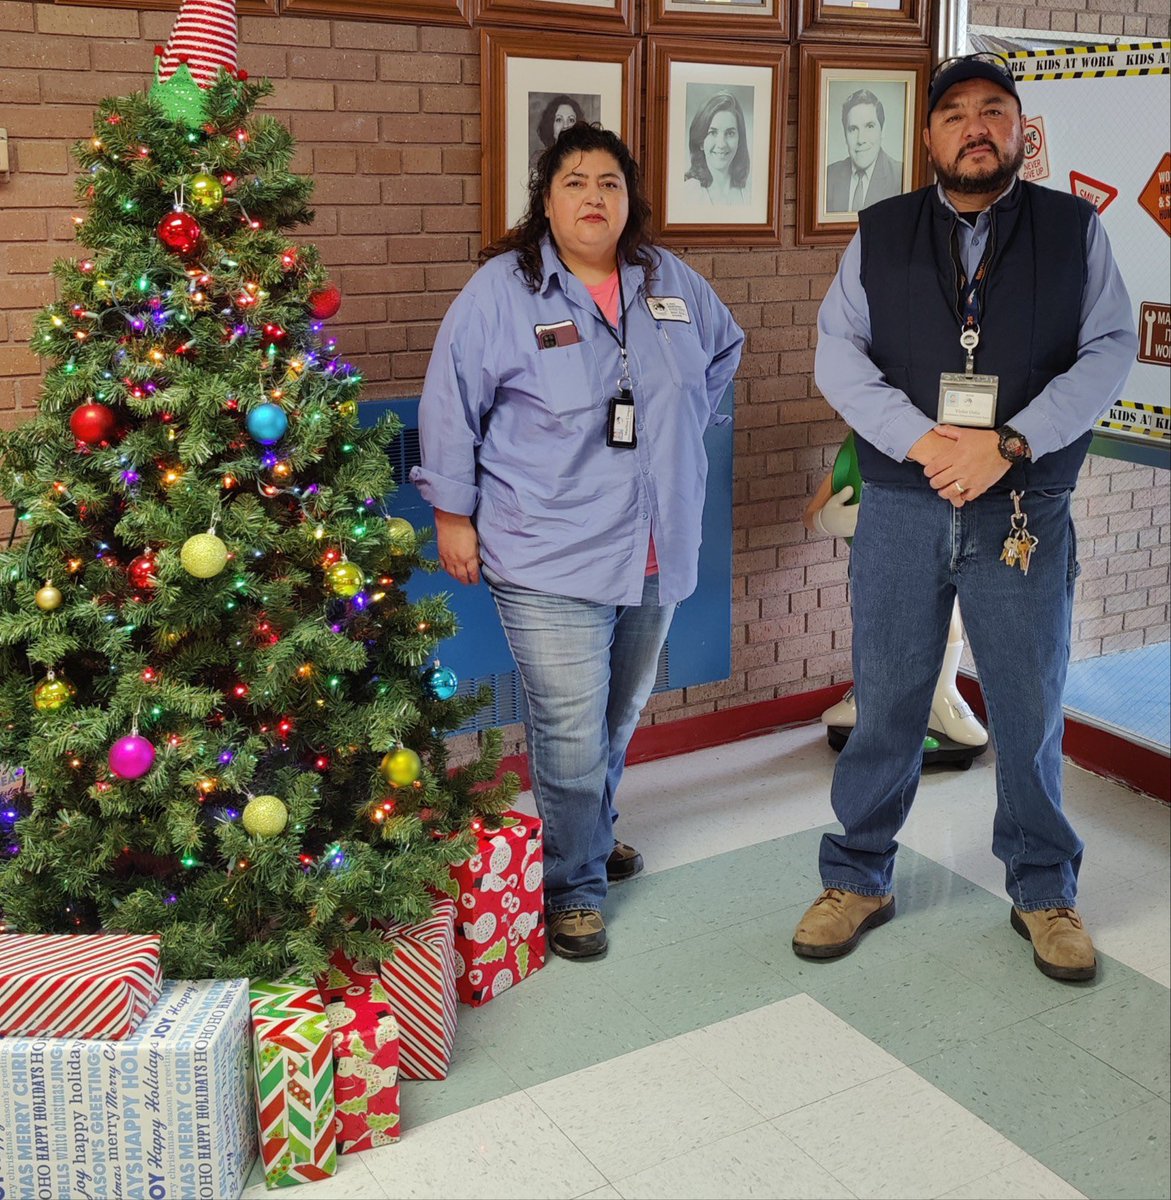 Thank you to Maritza Cangas and the EPISD Maintenance Department Angels for helping our Newman Families. Thank your for your generosity. Thank you also to Ms. Valerie Acuña in loving our Cowboys. #christmasangels   #focusonchildrenandfamilies @pauletta_howard @ELPASO_ISD